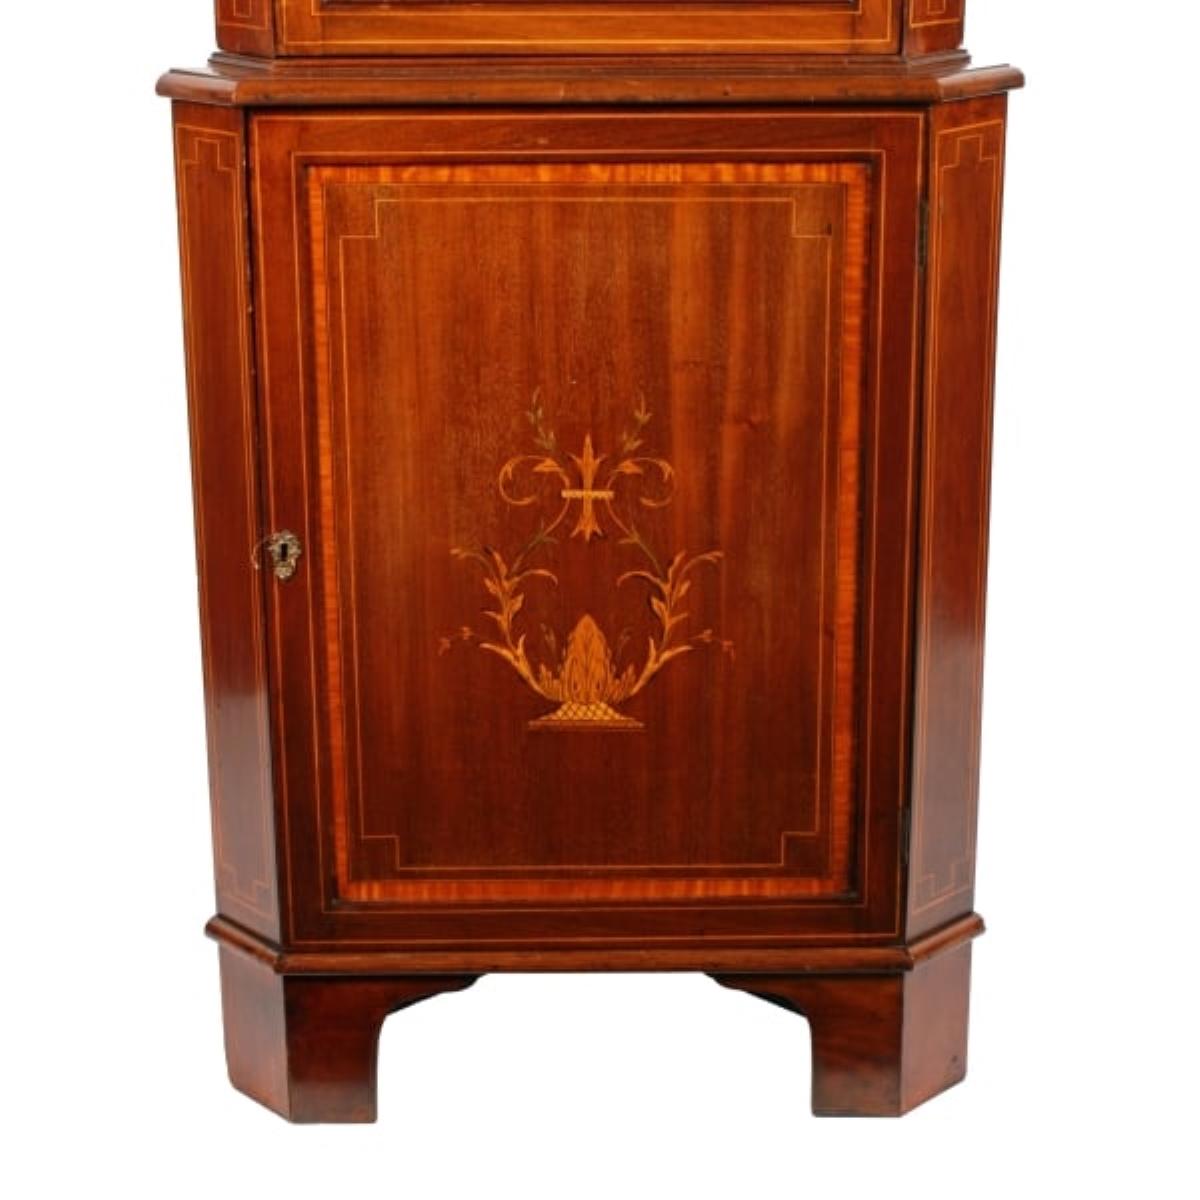 English Edwardian Inlaid Double Corner Cabinet, Early 20th Century For Sale